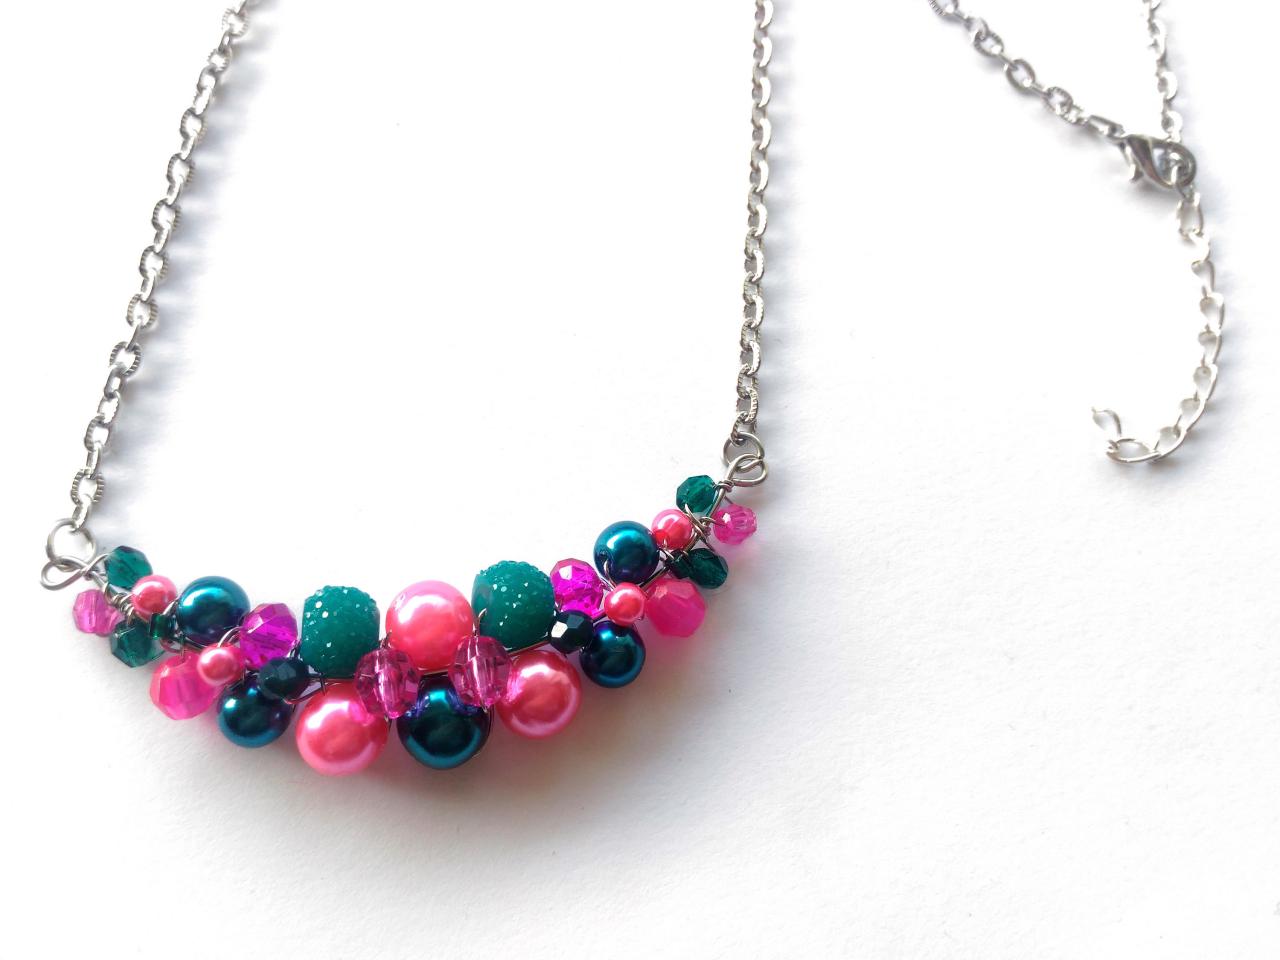 Magenta And Teal Beaded Necklace, Wire Wrapped Stainless Steel Bib Necklace, Pink And Teal Boho Necklace, Bohemian Statement Jewelry